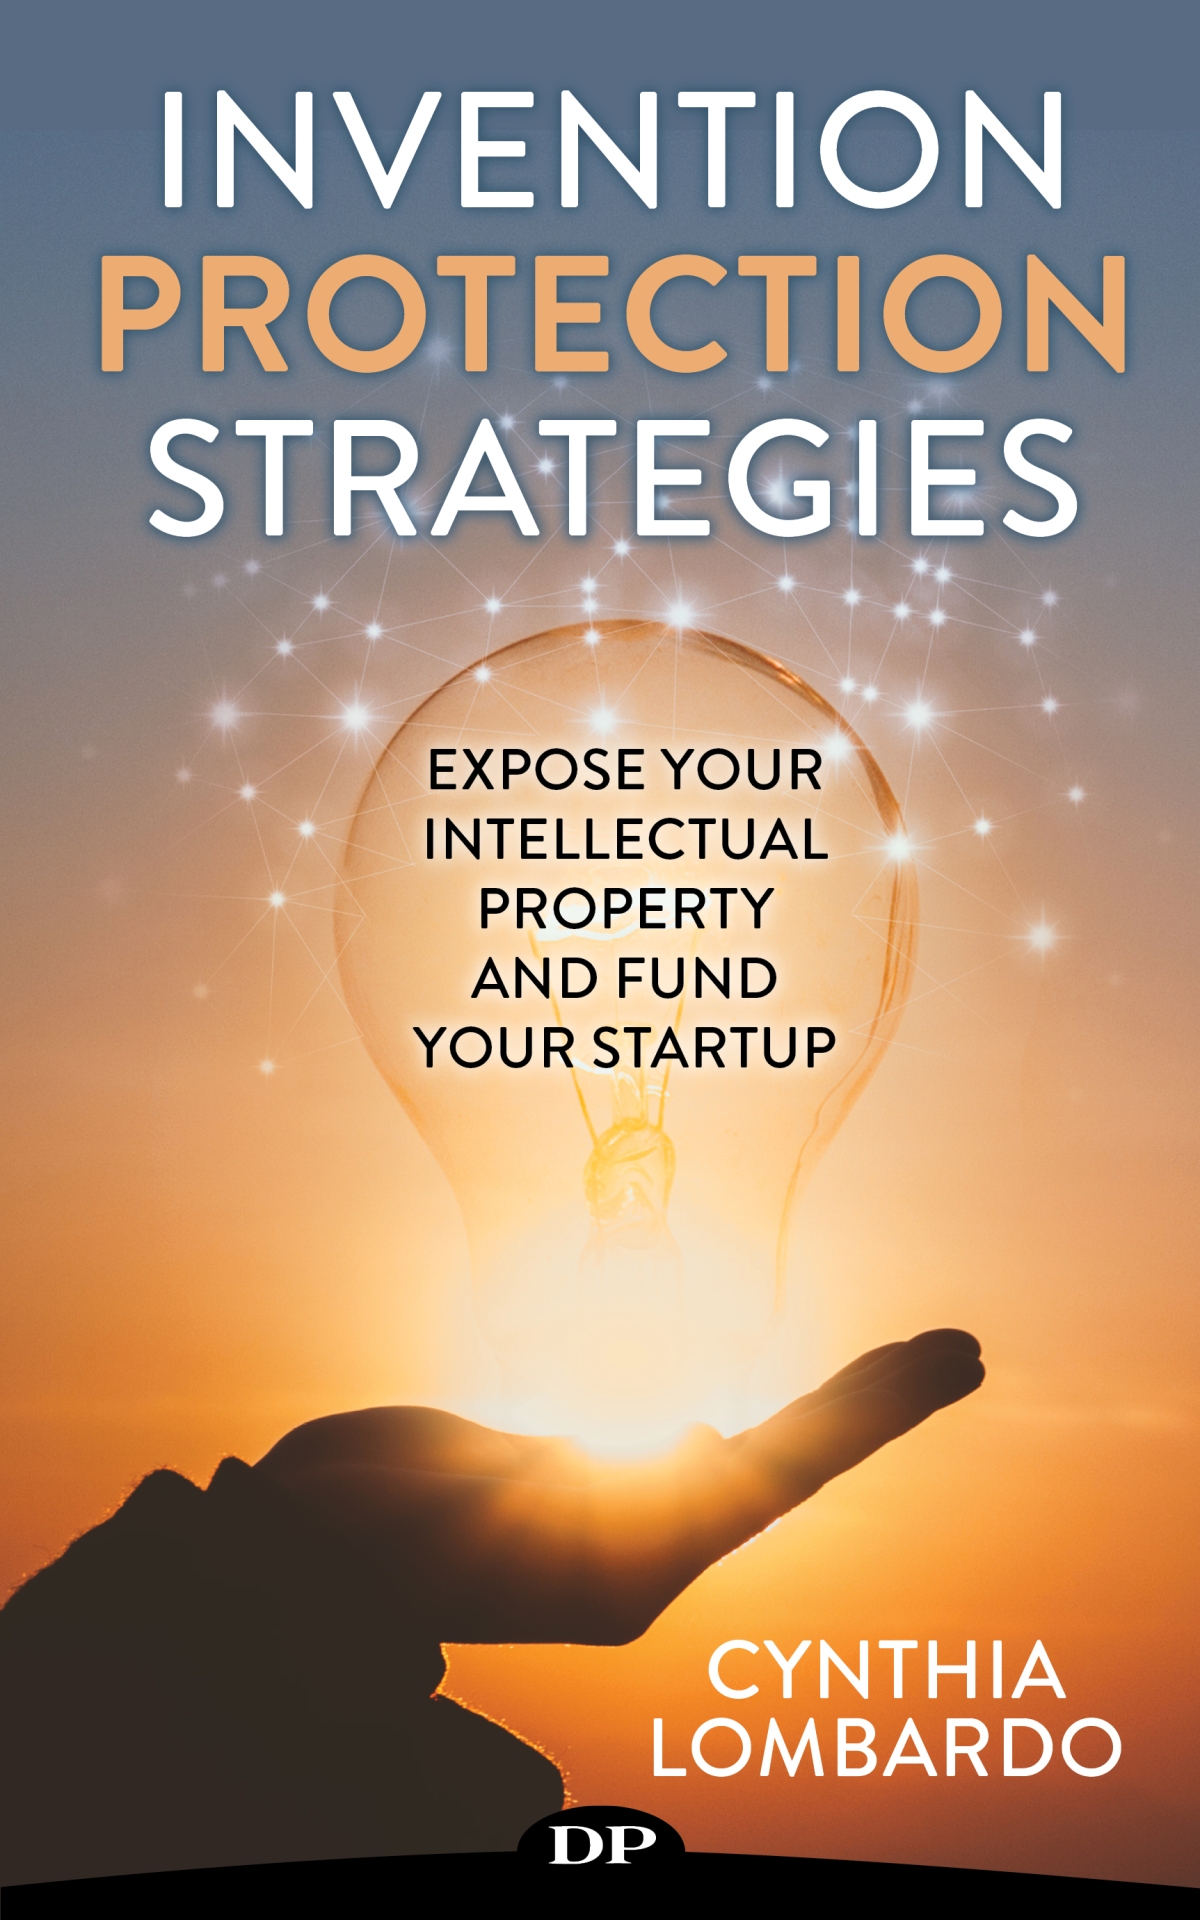 Invention Protection Strategies by Cynthia Lombardo